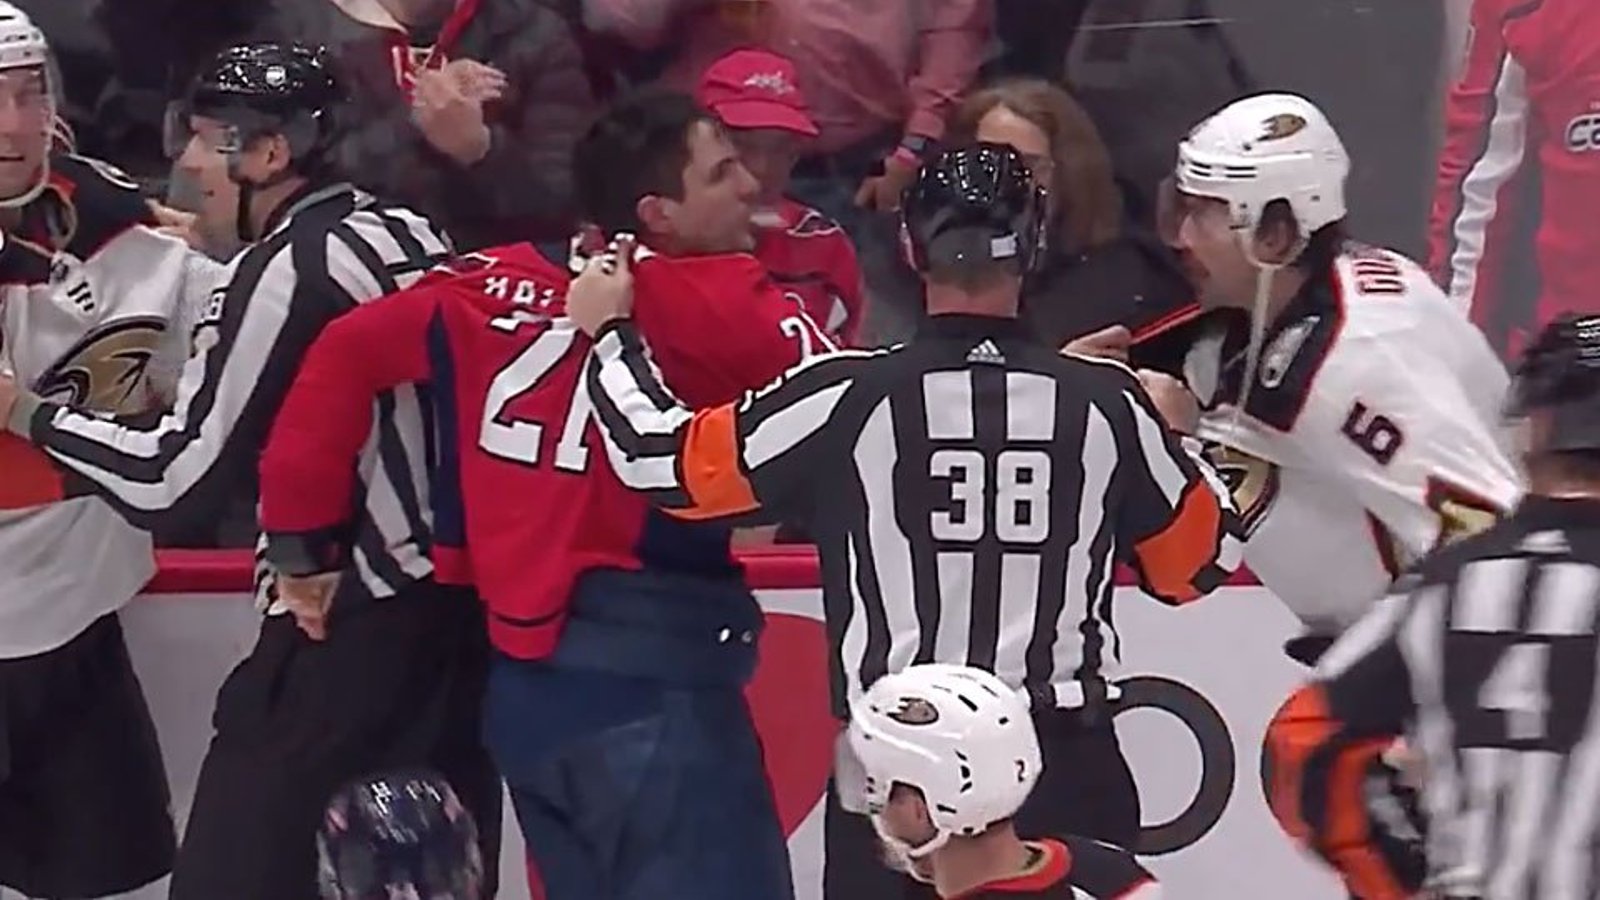 Suspension coming to Hathaway for spitting on Gudbranson!